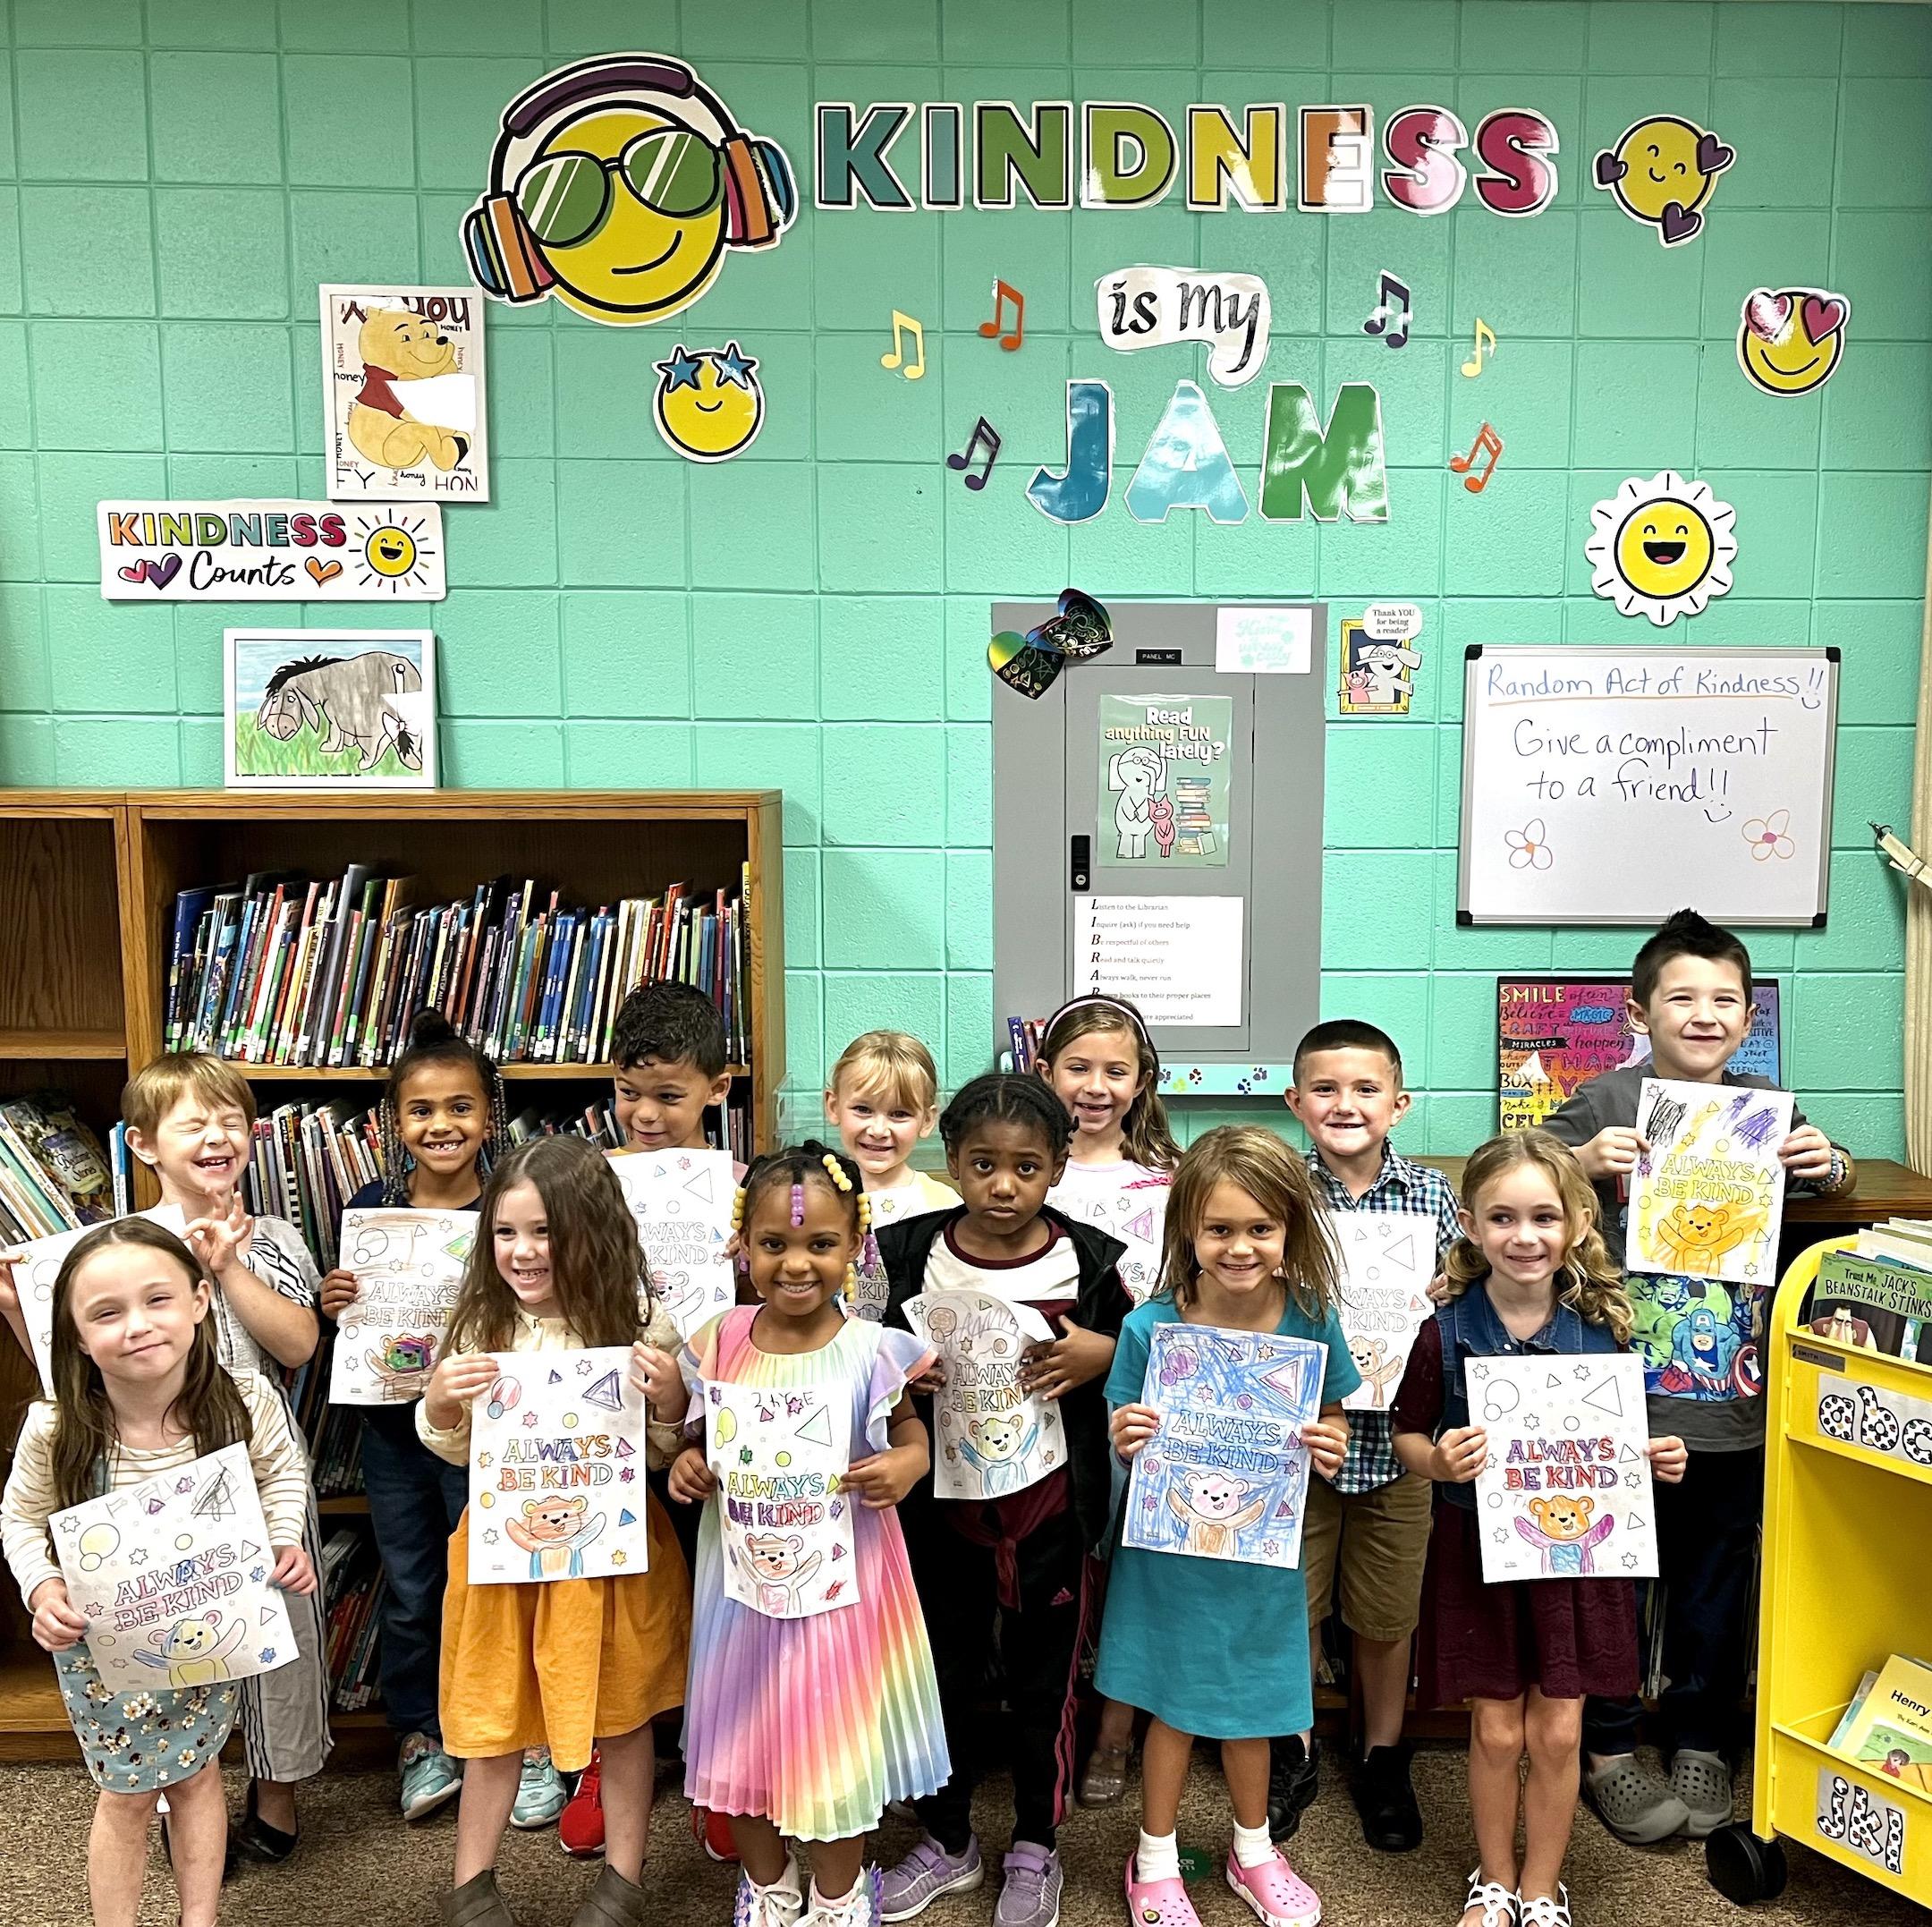 The afternoon kindergarten class finishes a ‘kindness’ lesson